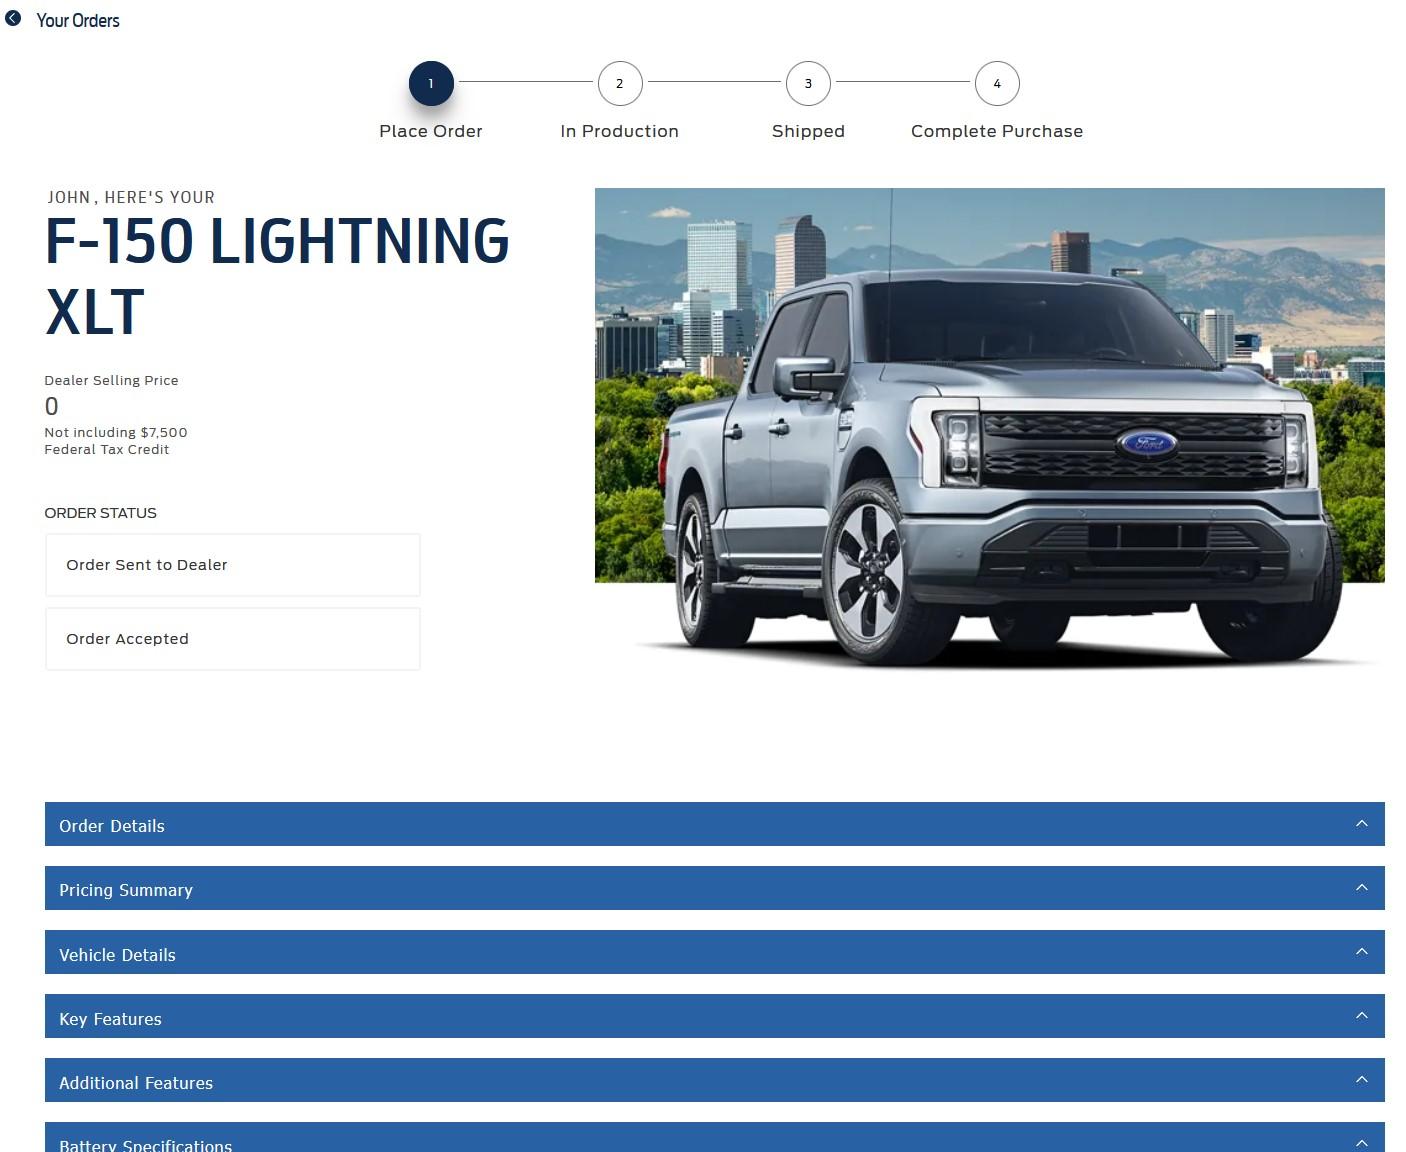 Ford F-150 Lightning Lightning WAVE 2 Emails Coming 1/19 For Ordering on 1/20 – Per Ford Customer Service Screenshot 2022-01-20 141624